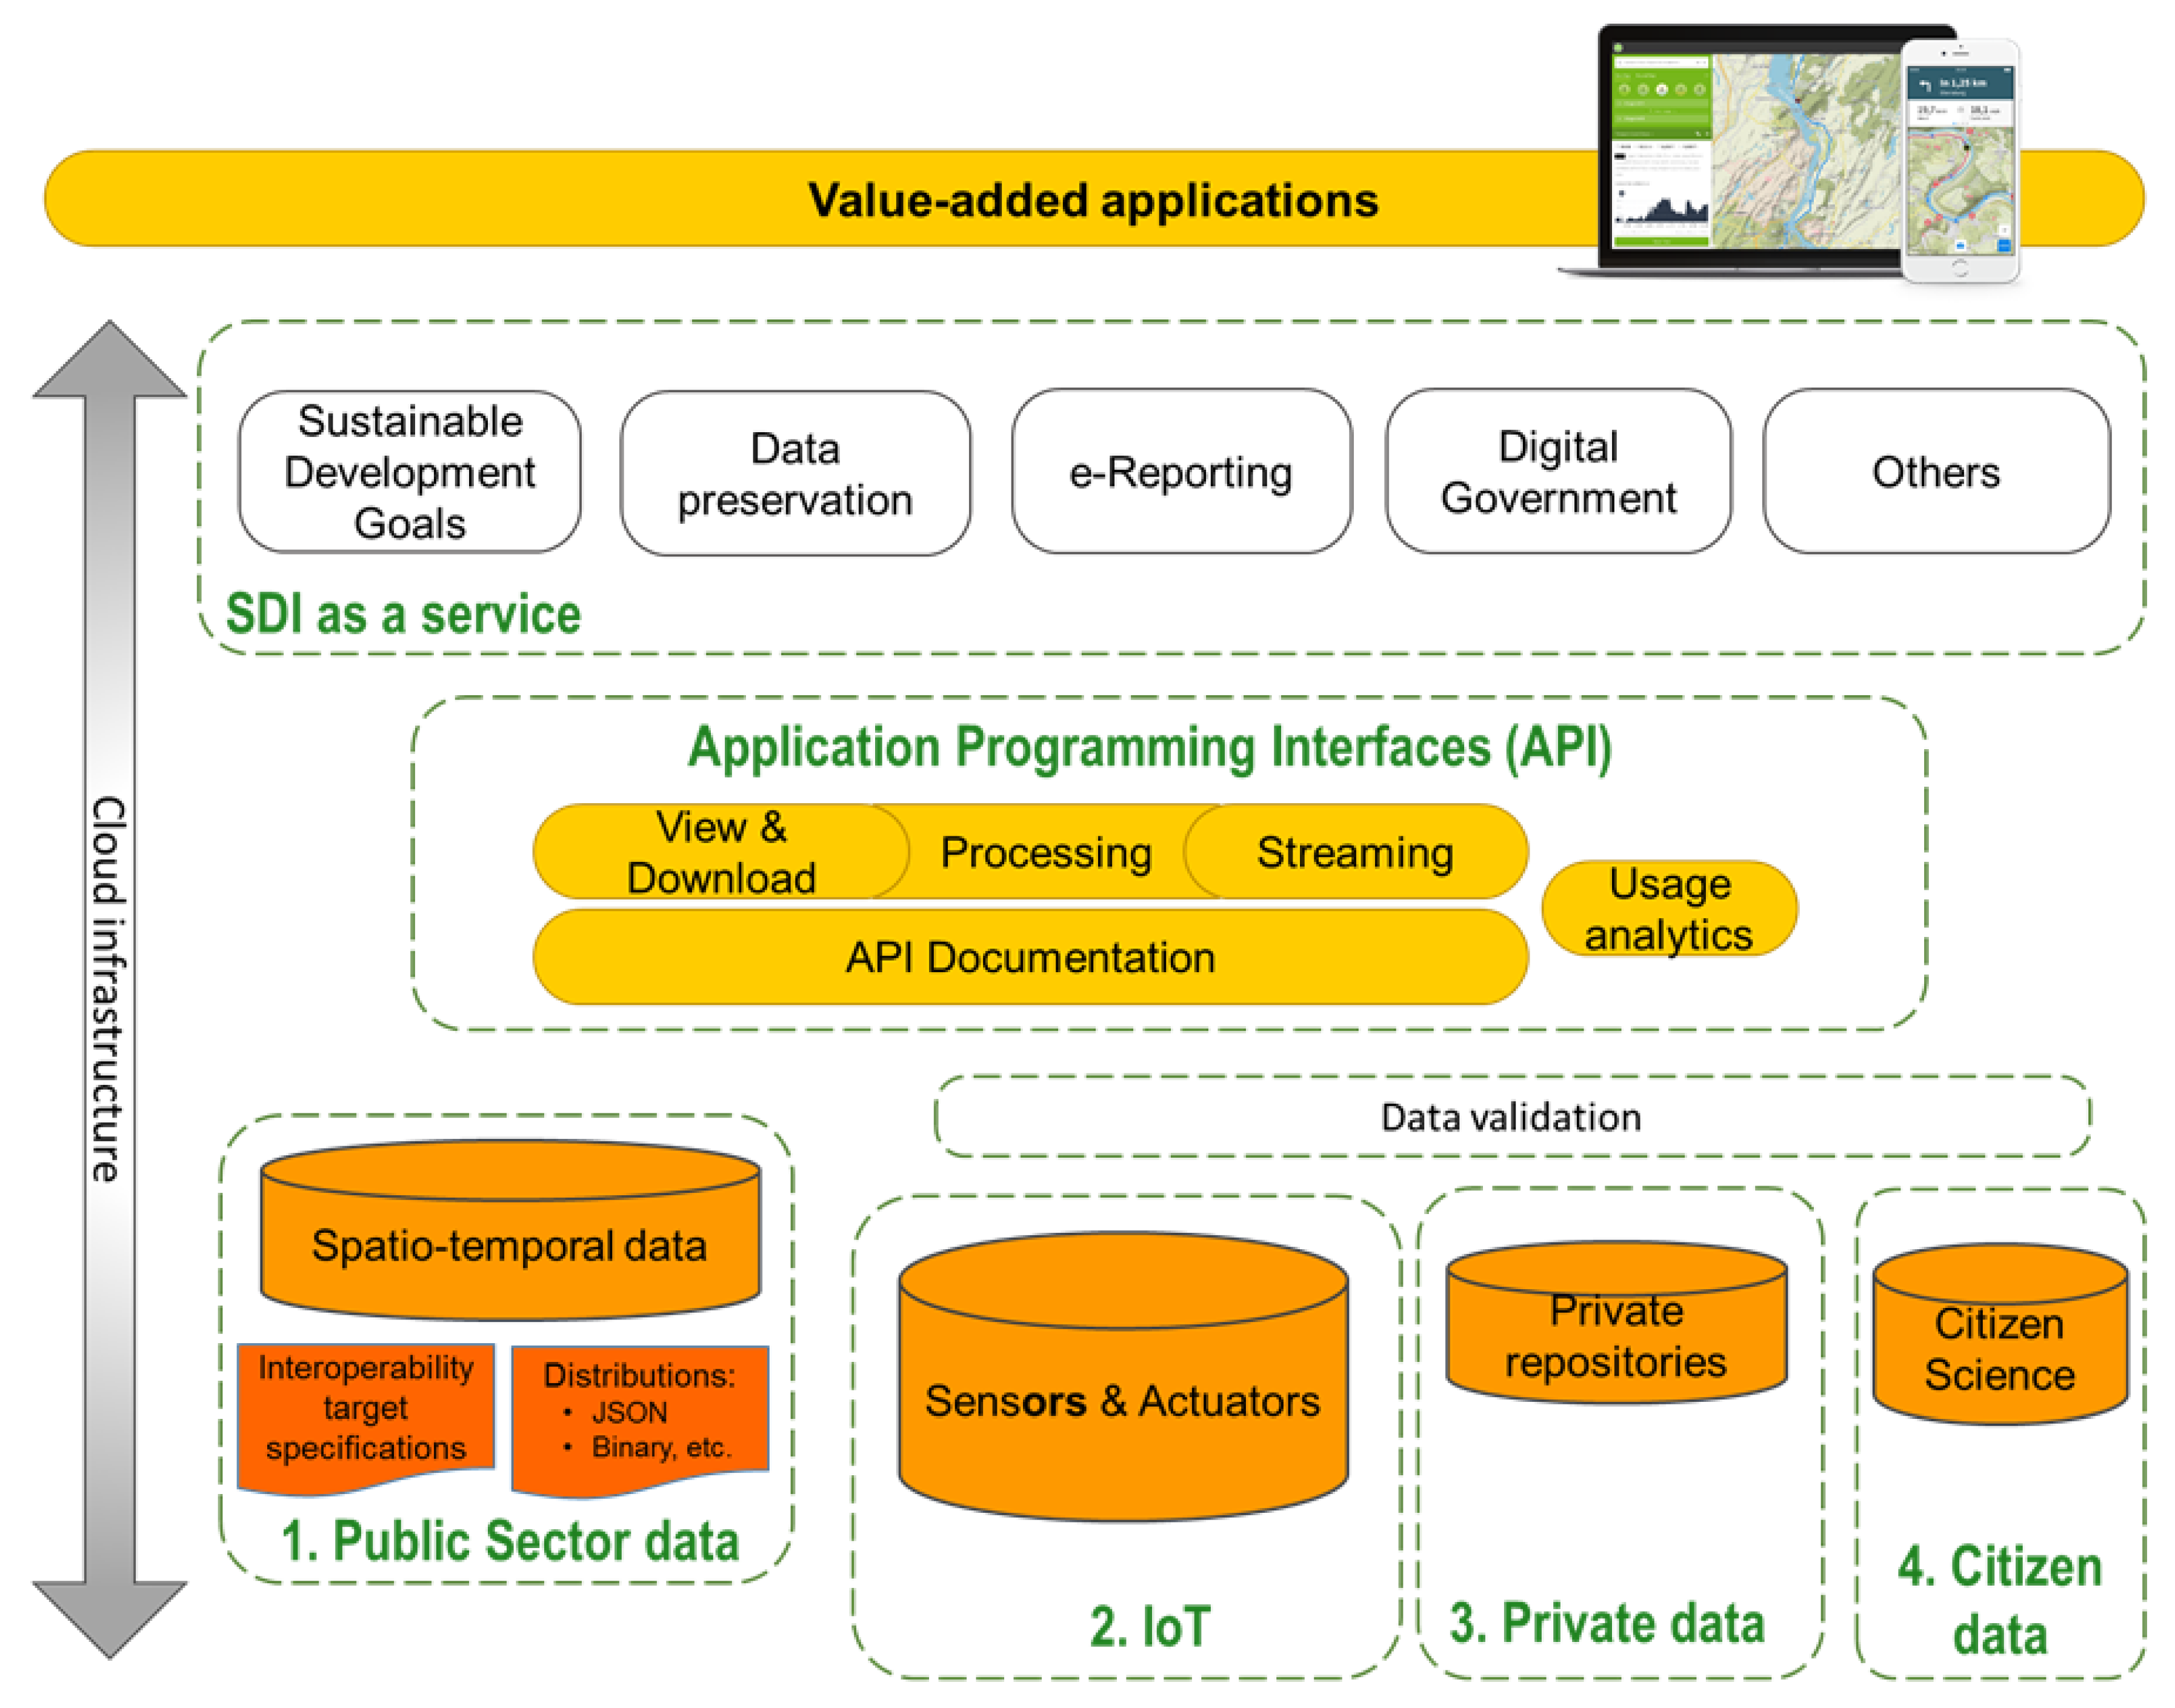 Spatial Data Infrastructures in Spain: State of play  - inspire